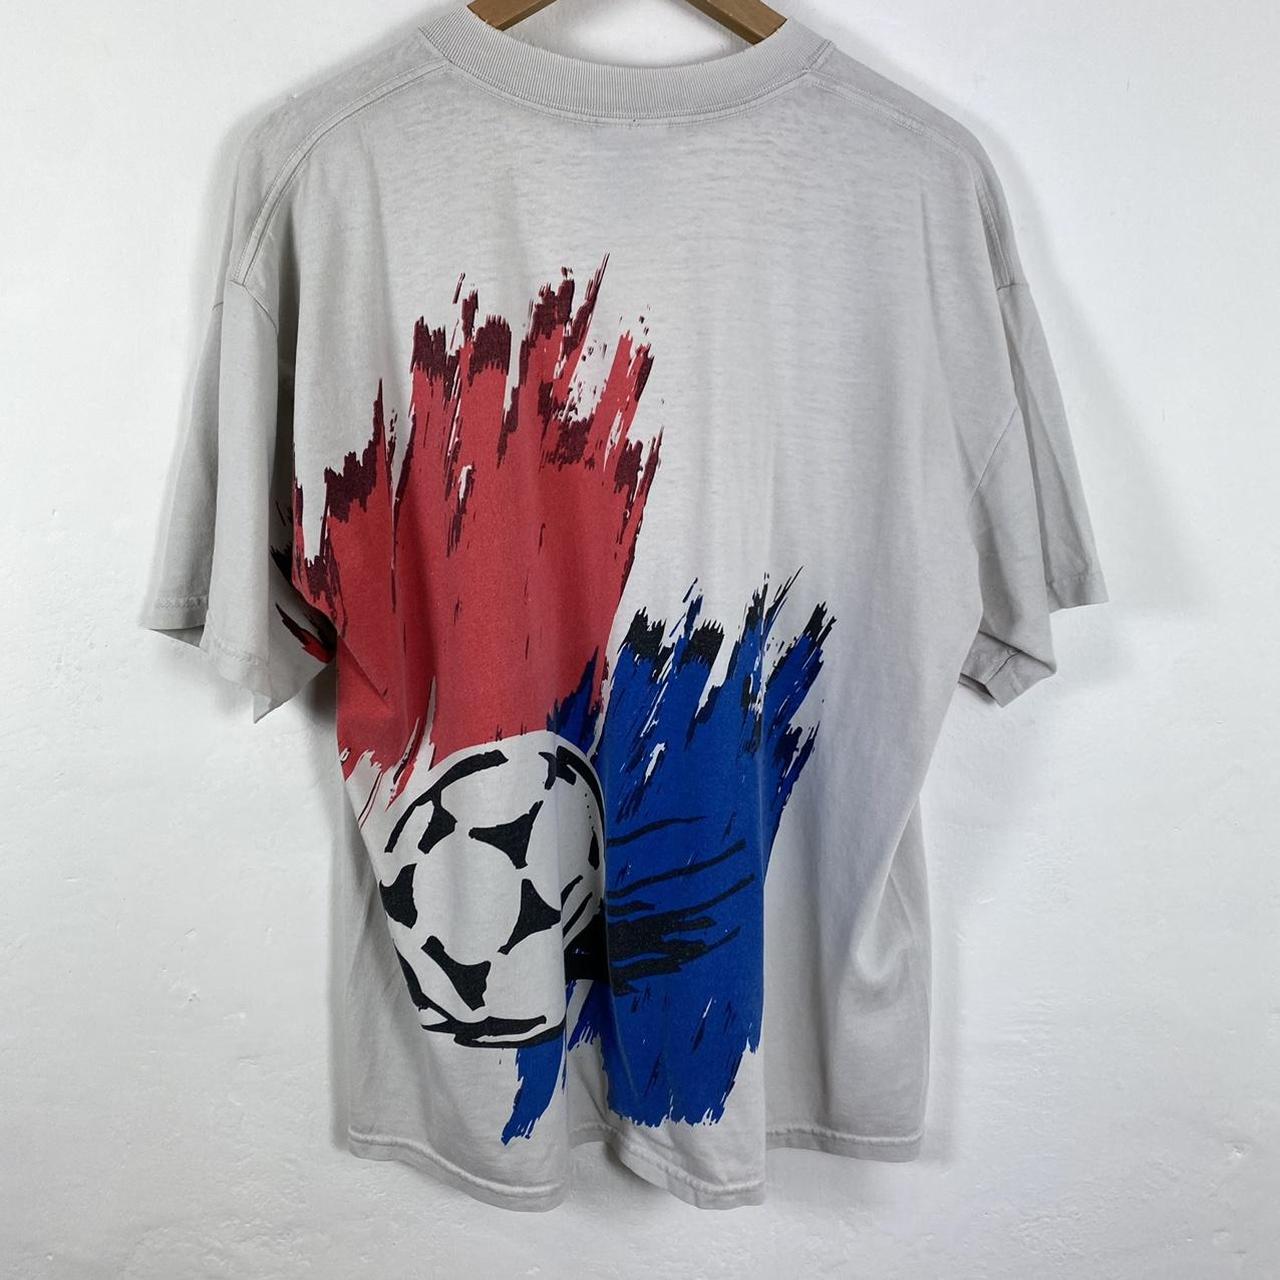 World Cup 98 promo t shirt large